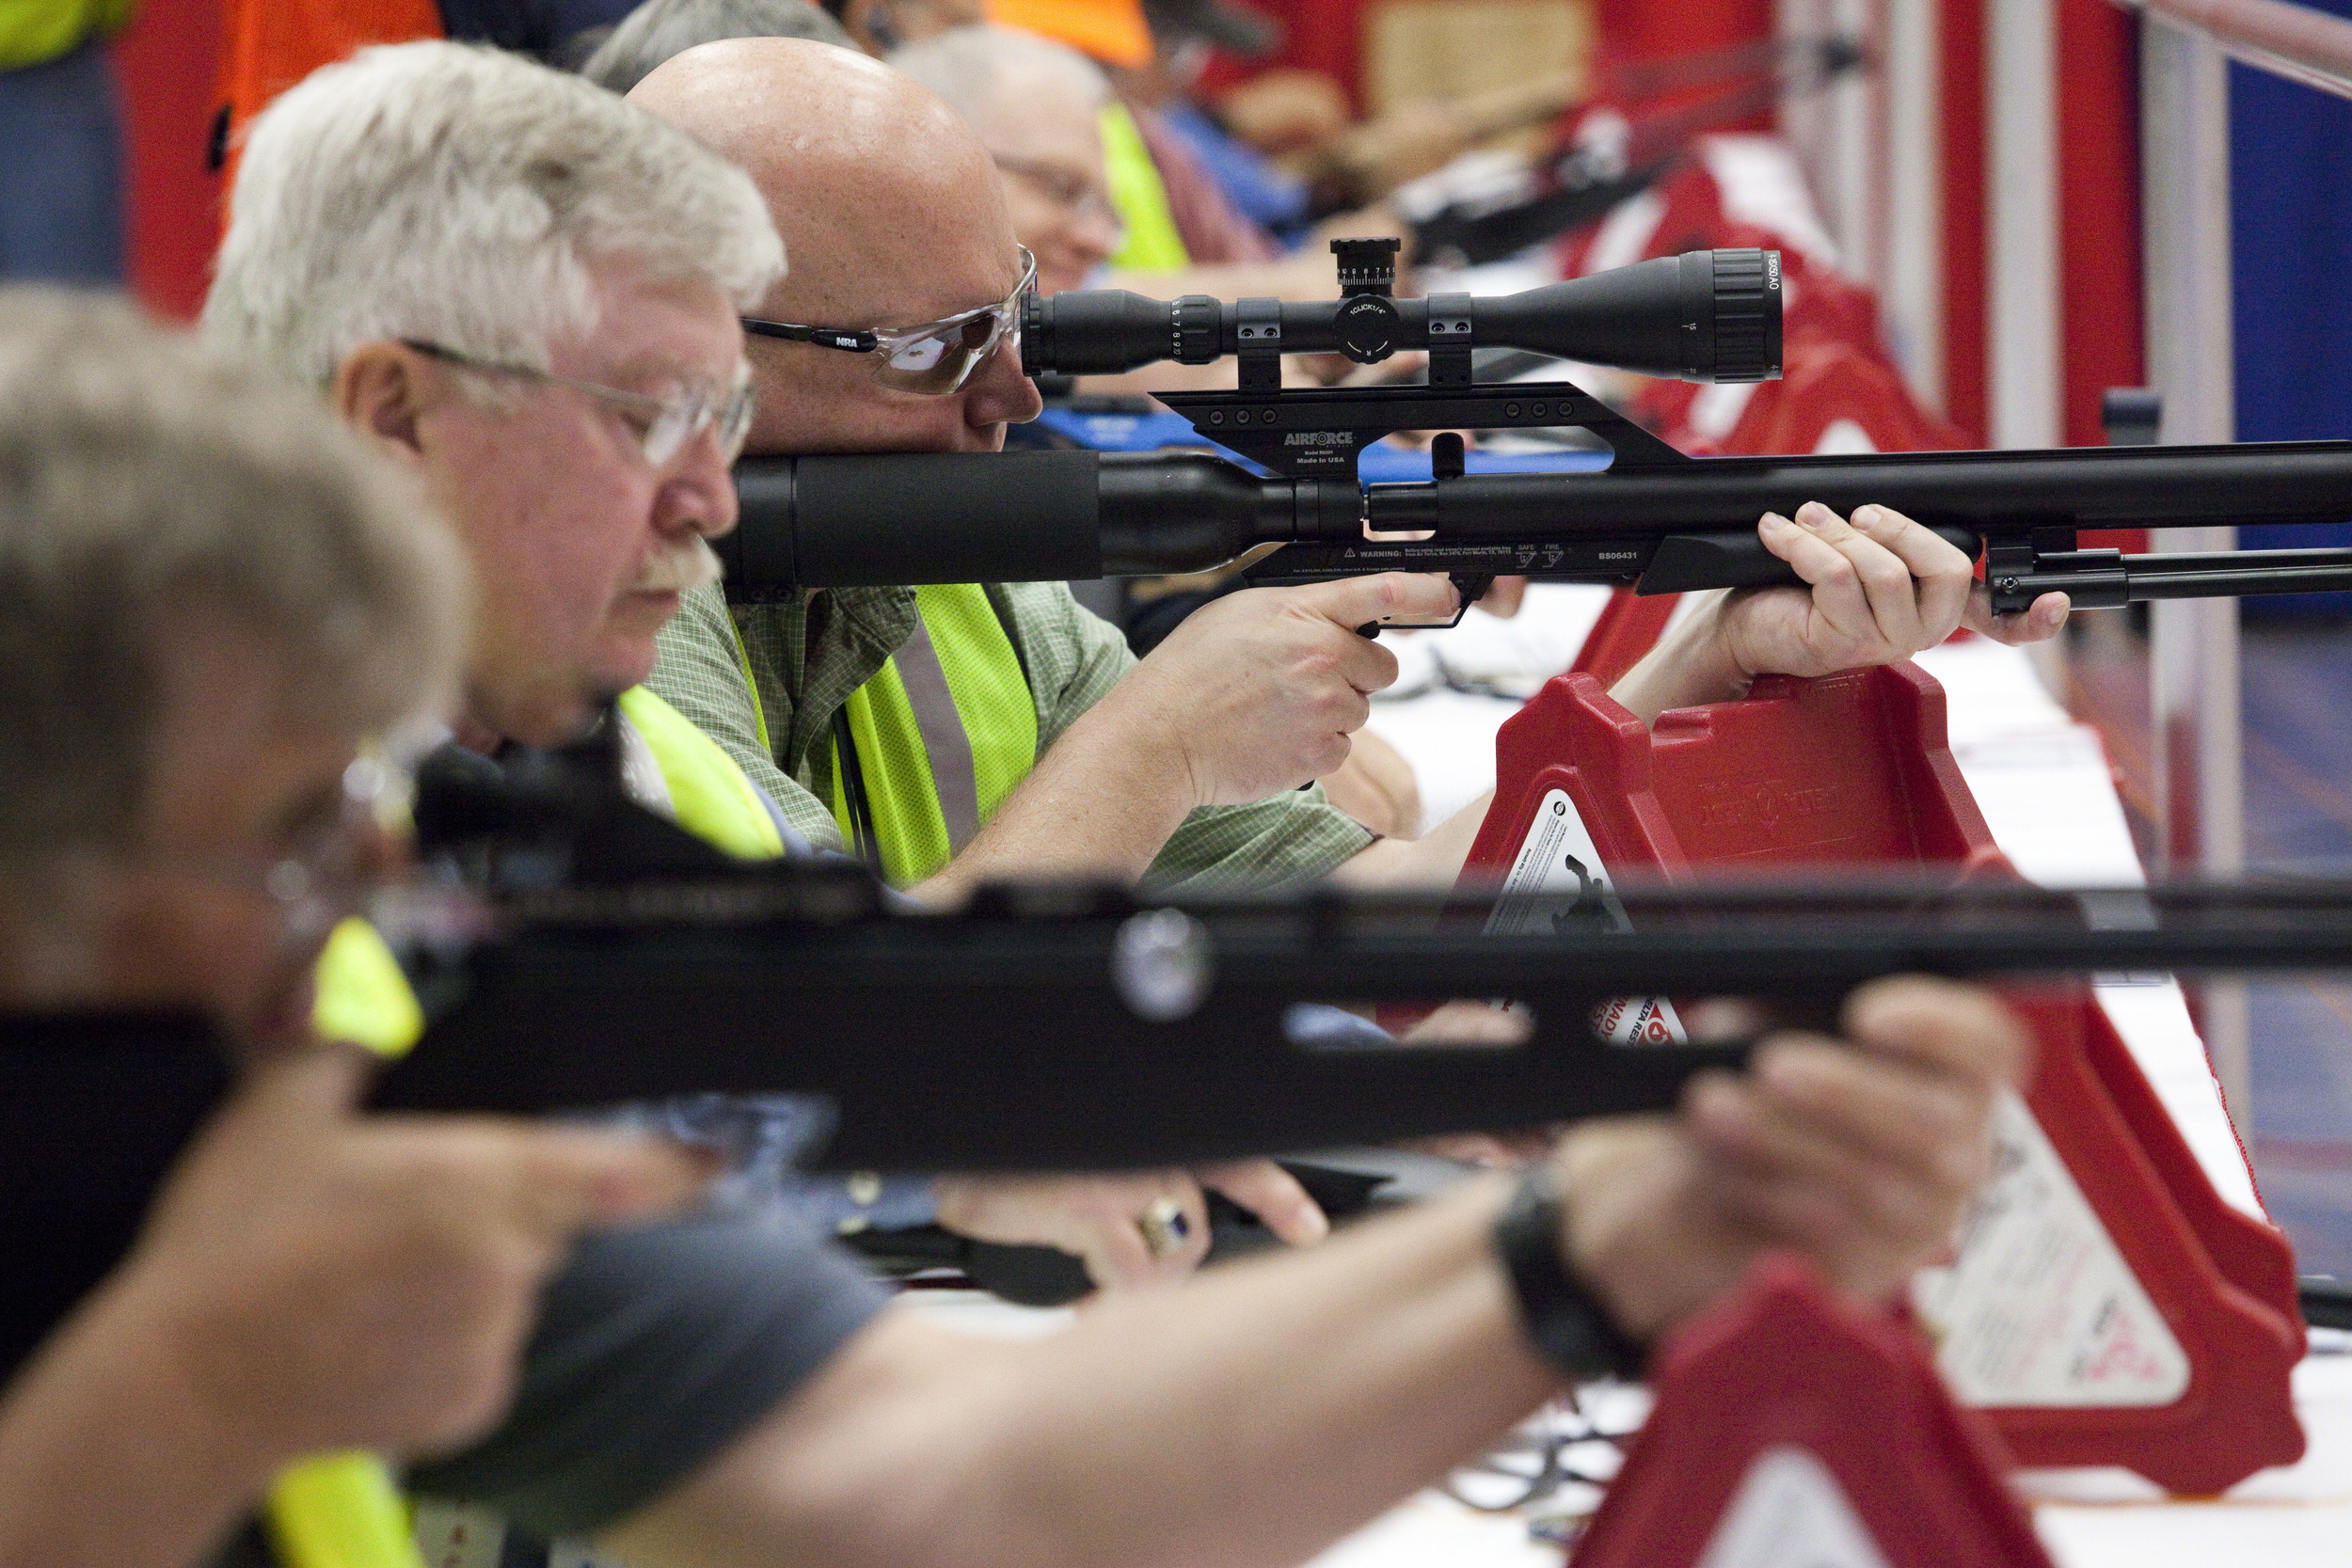  Volunteers sight air rifles at the Pyramyd Air air gun indoor shooting range at the 2013 National Rifle Association Meeting and Exhibits May 2, 2013 in Houston. Instructors were available for those willing to pay the $1.00 fee for five shots. 